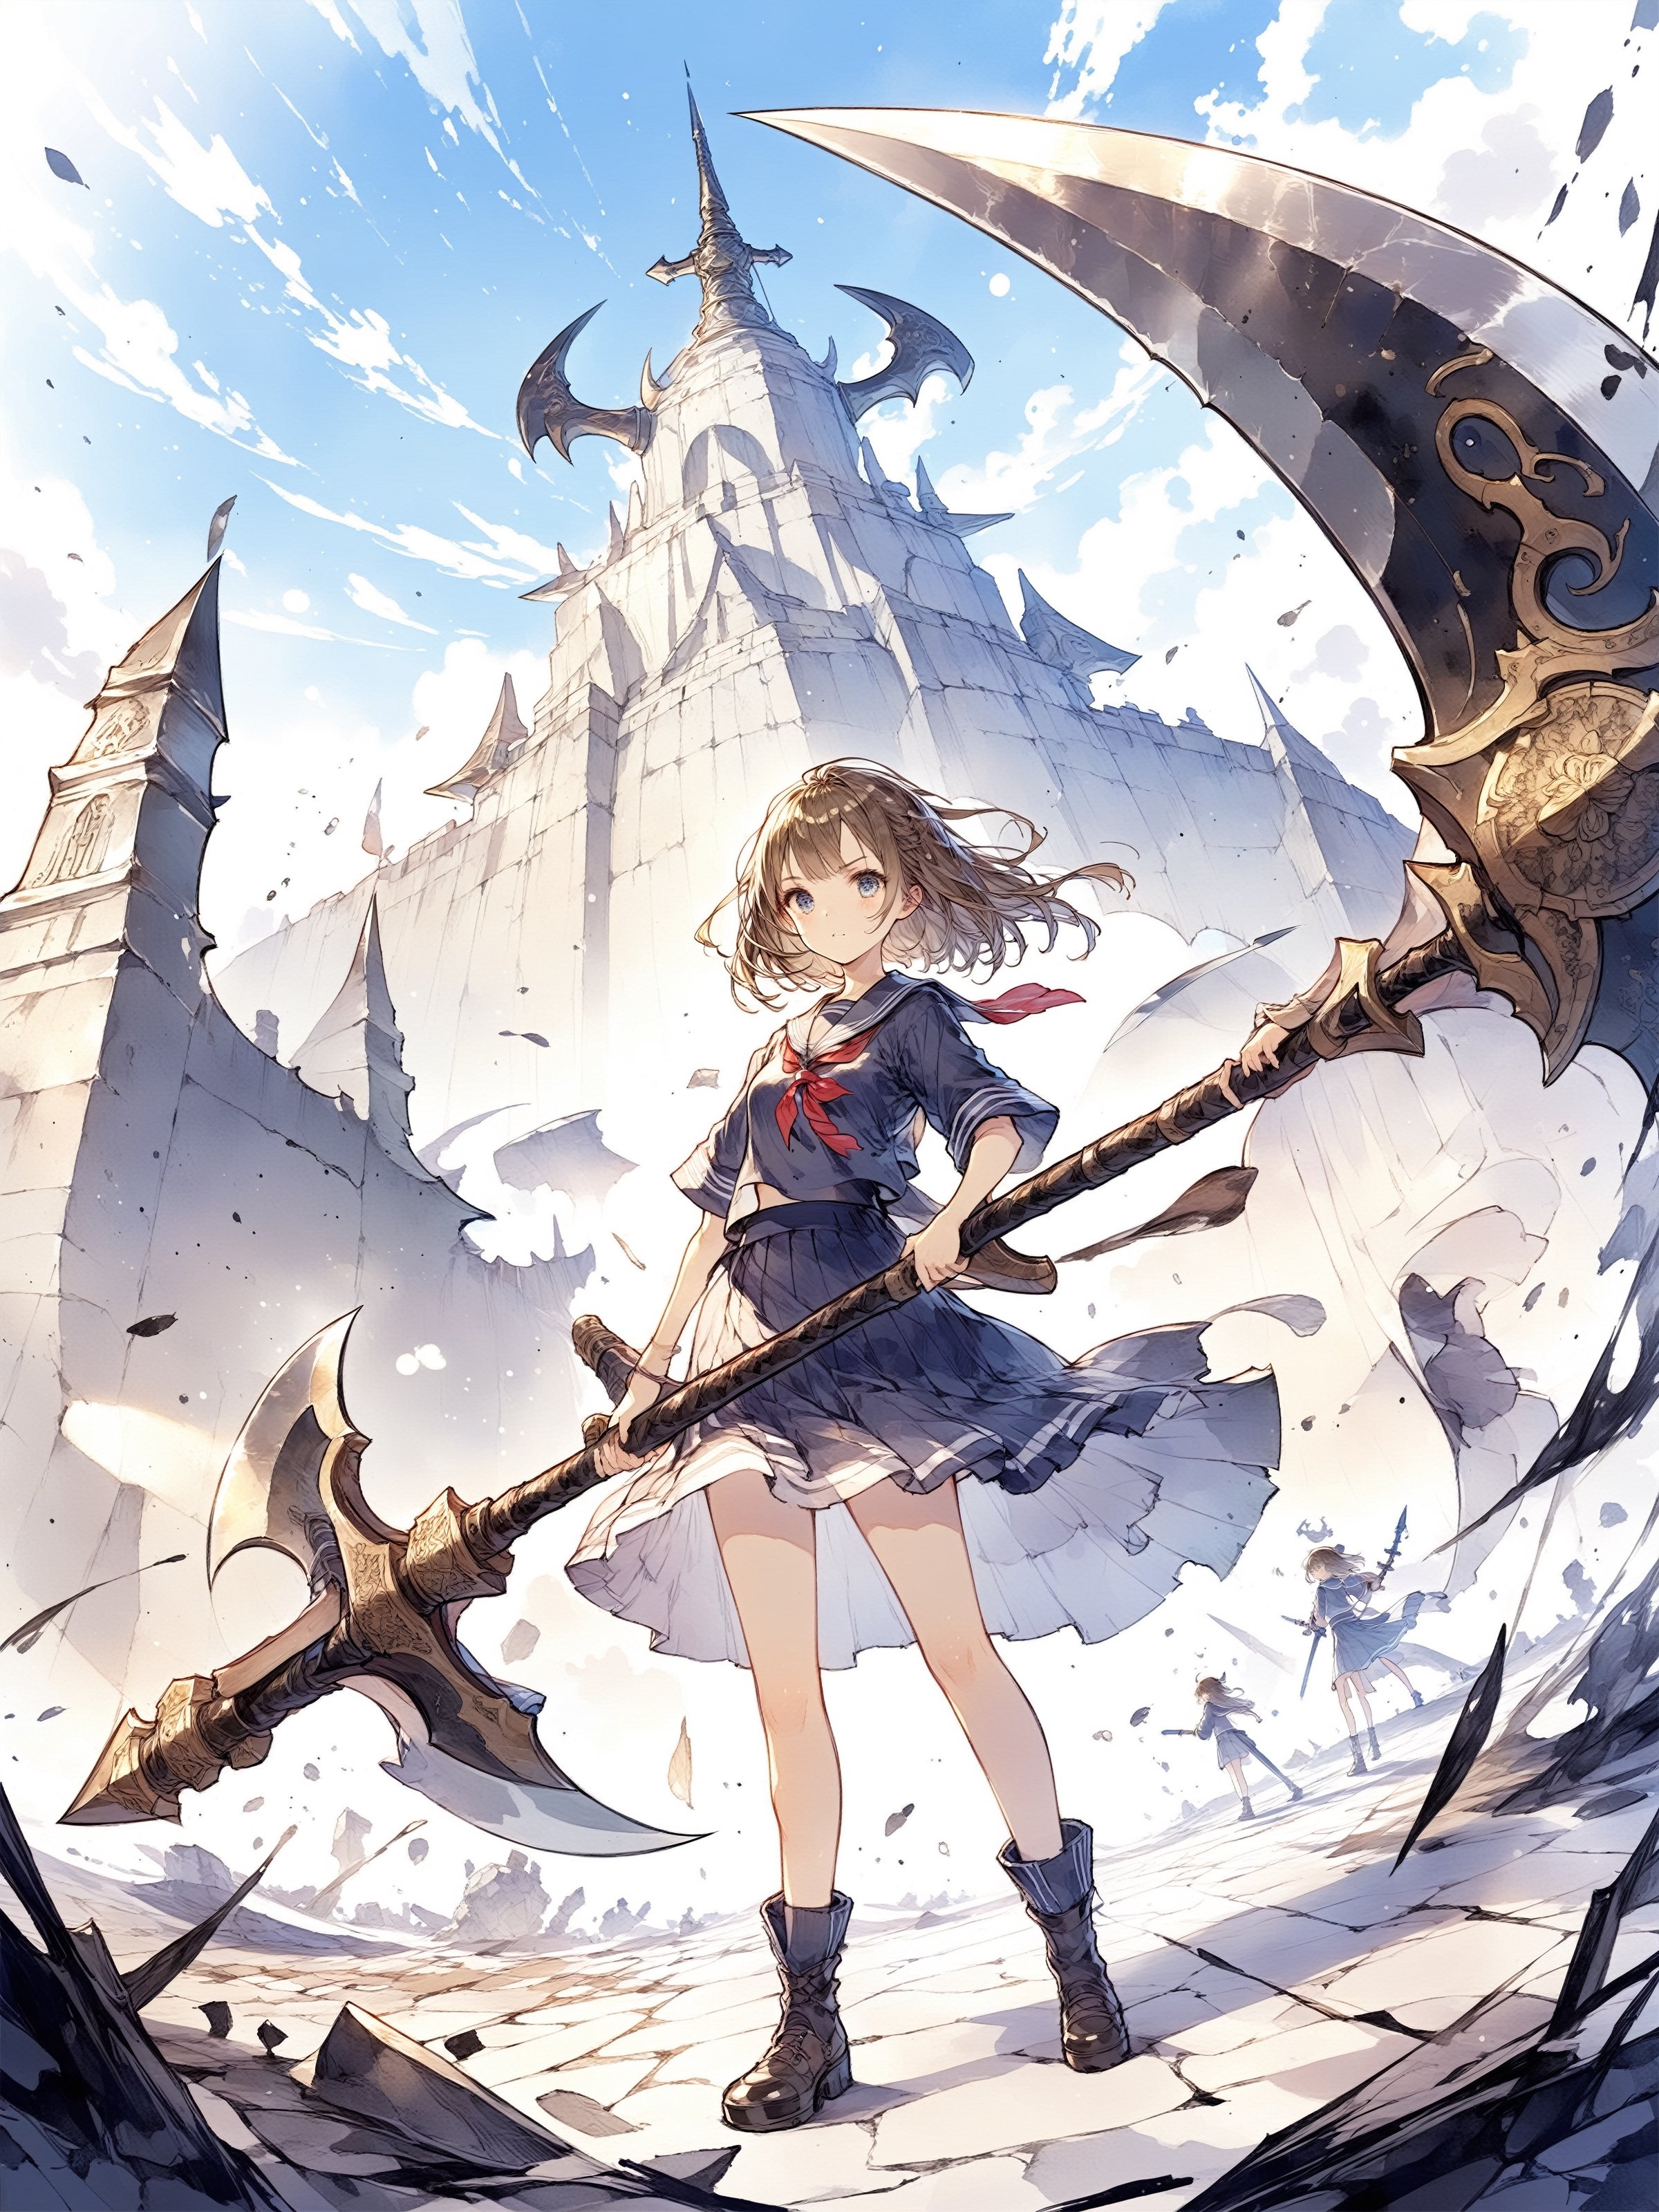 Official Art, Unity 8K Wallpaper, Extreme Detailed, Beautiful and Aesthetic, Masterpiece, Top Quality, perfect anatomy, a beautifully drawn (((ink illustration))) depicting, integrating elements of calligraphy, vintage, watercolor painting, concept art, (best illustration), (best shadow), Analog Color Theme, vivid colours, contrast, smooth, sharp focus, scenery,
A girl standing with (a huge battle axe:1.1), 
The battle axe is bigger than the girl's height.
Battle axe blade glistening silver.
Short brown hair. Serafuku.
Beautiful eyes. Beautiful hair.
Very detailed and quality illustration.
Blue sky, summer sky. upper body, 
masterpiece, top quality, aesthetic, 
battle_axe,(Pencil_Sketch:1.2